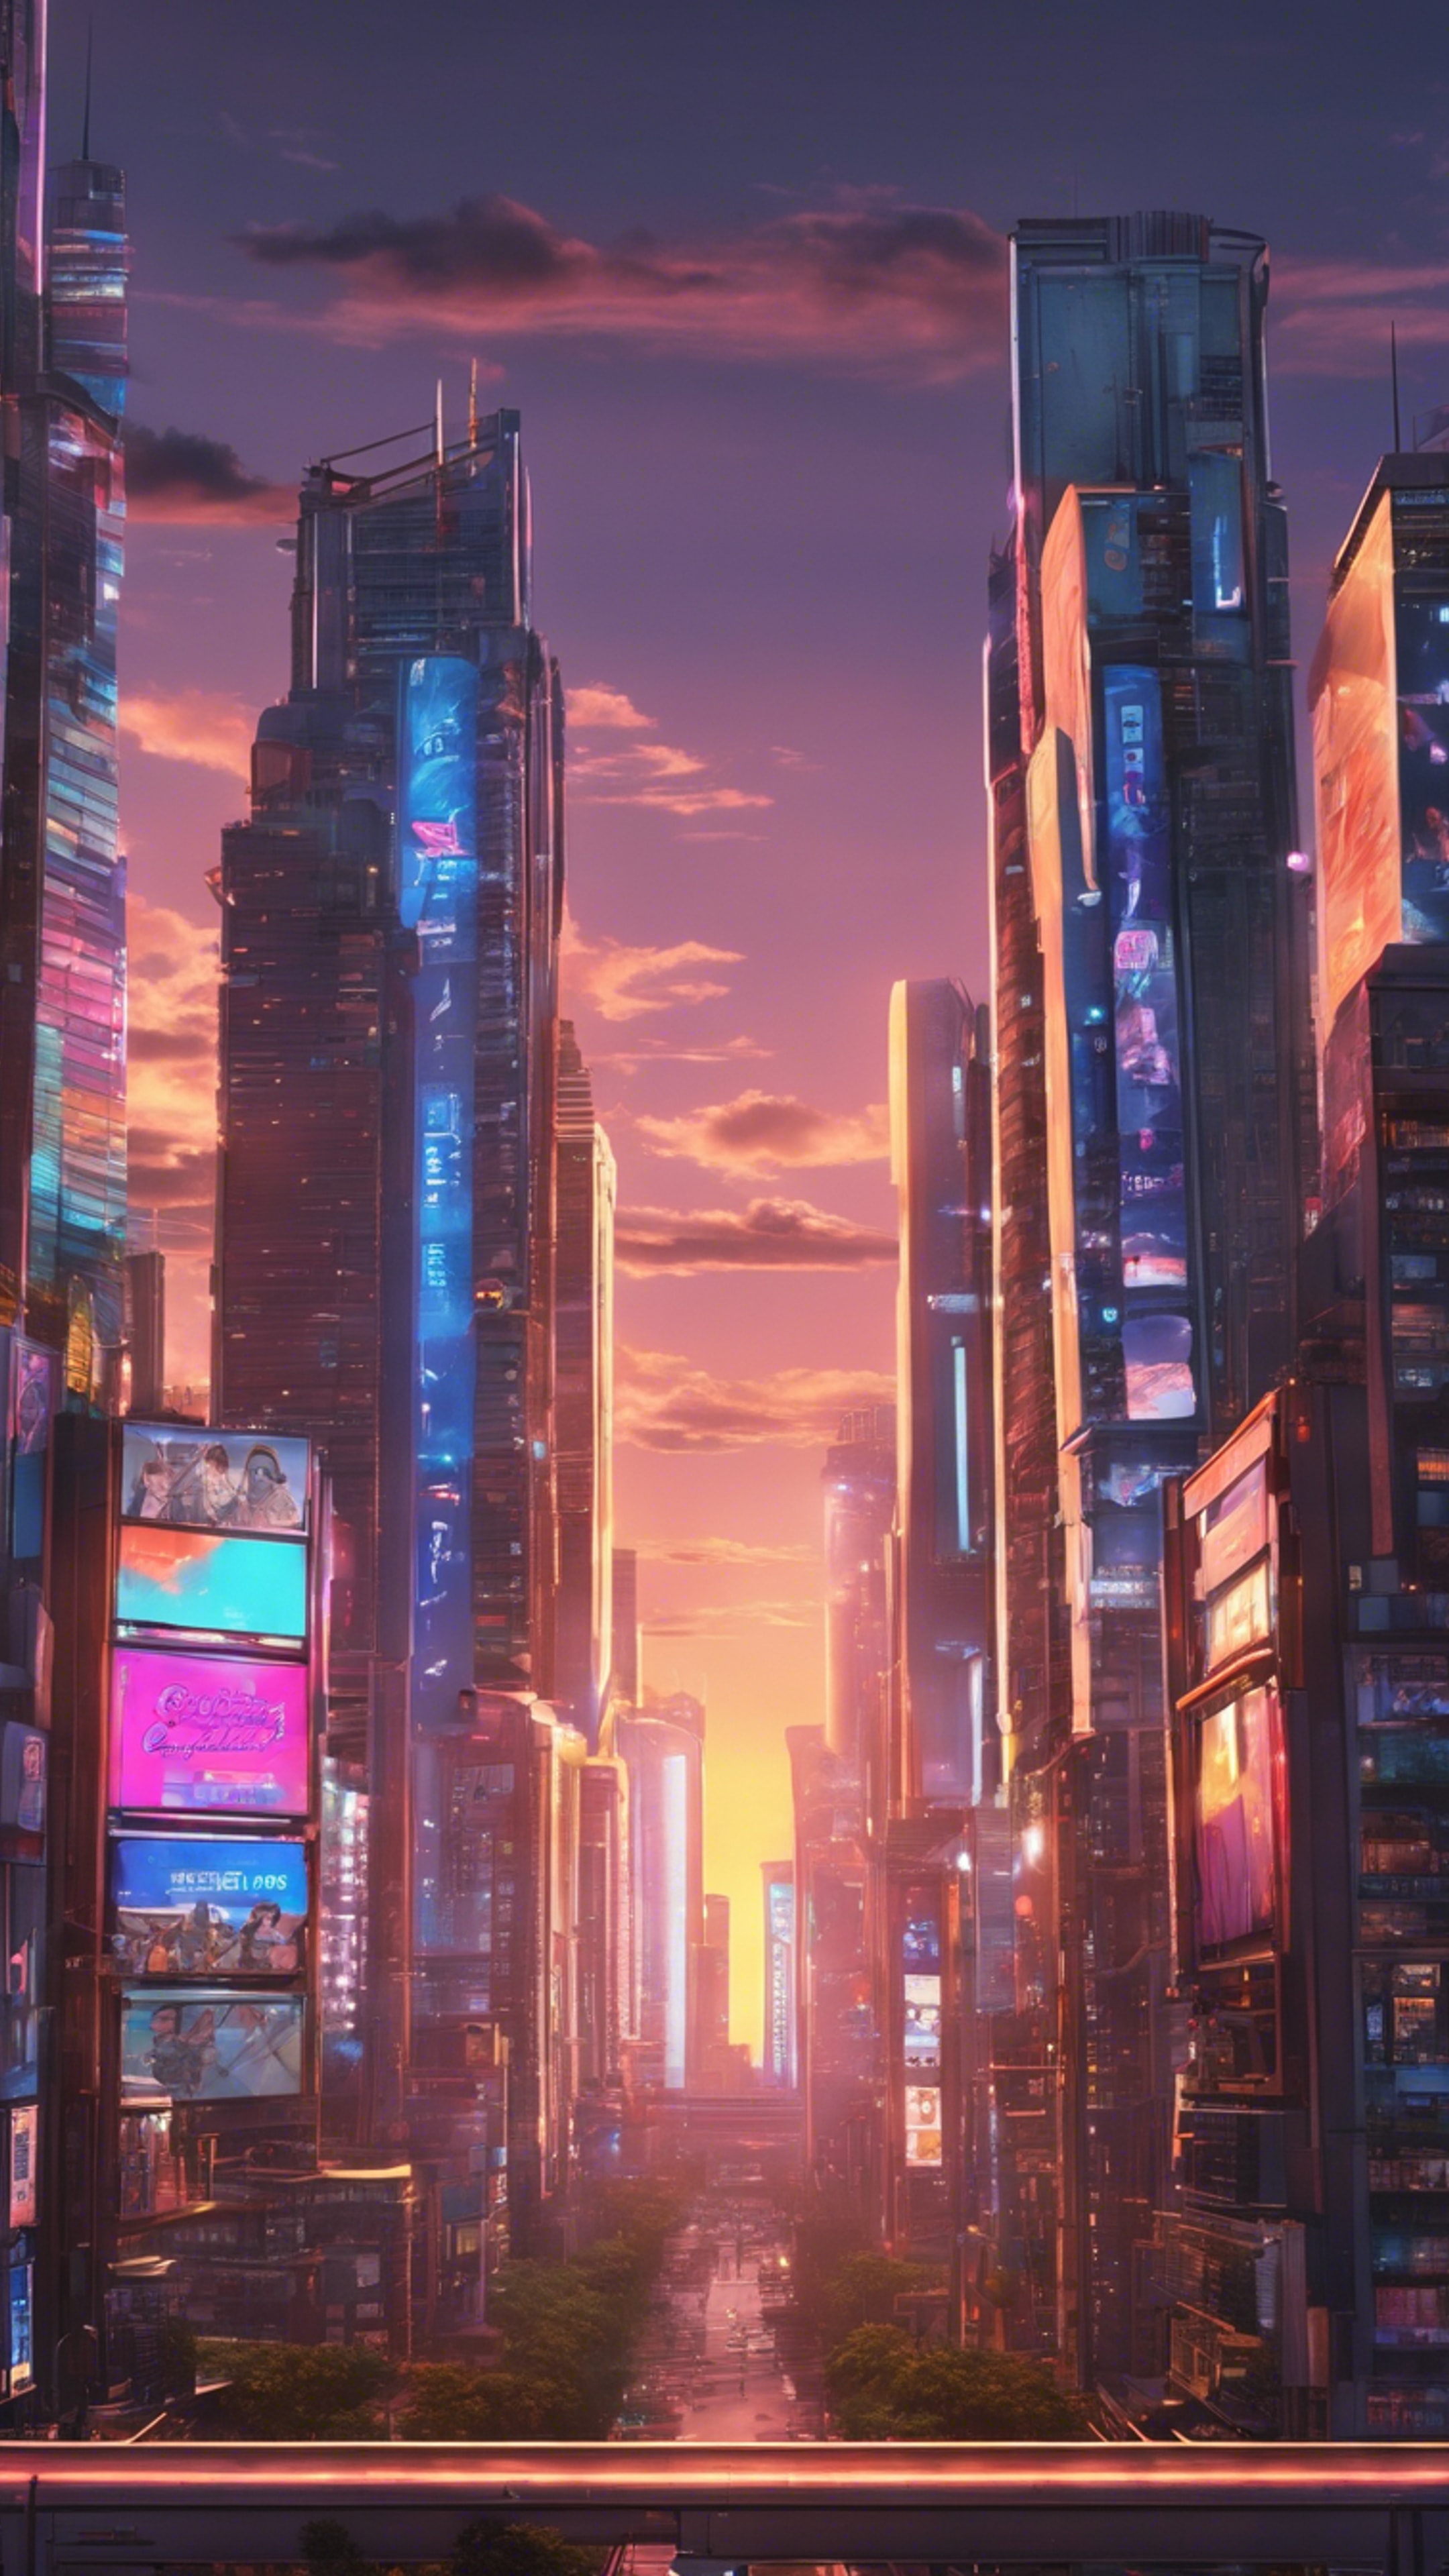 A cool anime-themed cityscape at sunset with towering skyscrapers and glowing neon billboards.壁紙[63ed83801d984cce89ed]